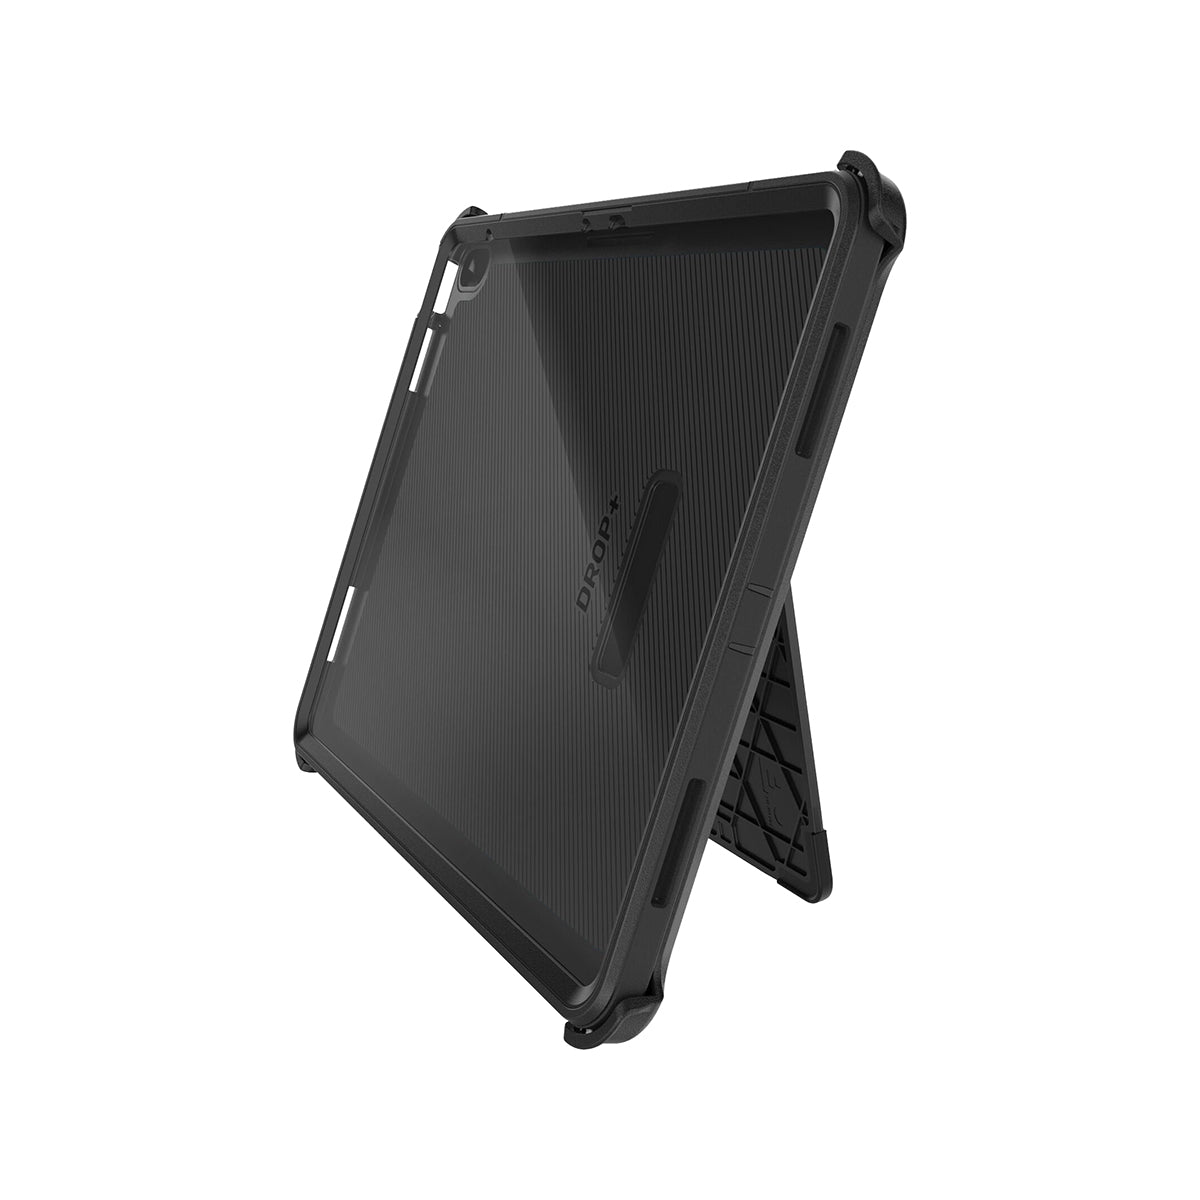 OtterBox Defender Rugged Tablet Case for iPad Air 13